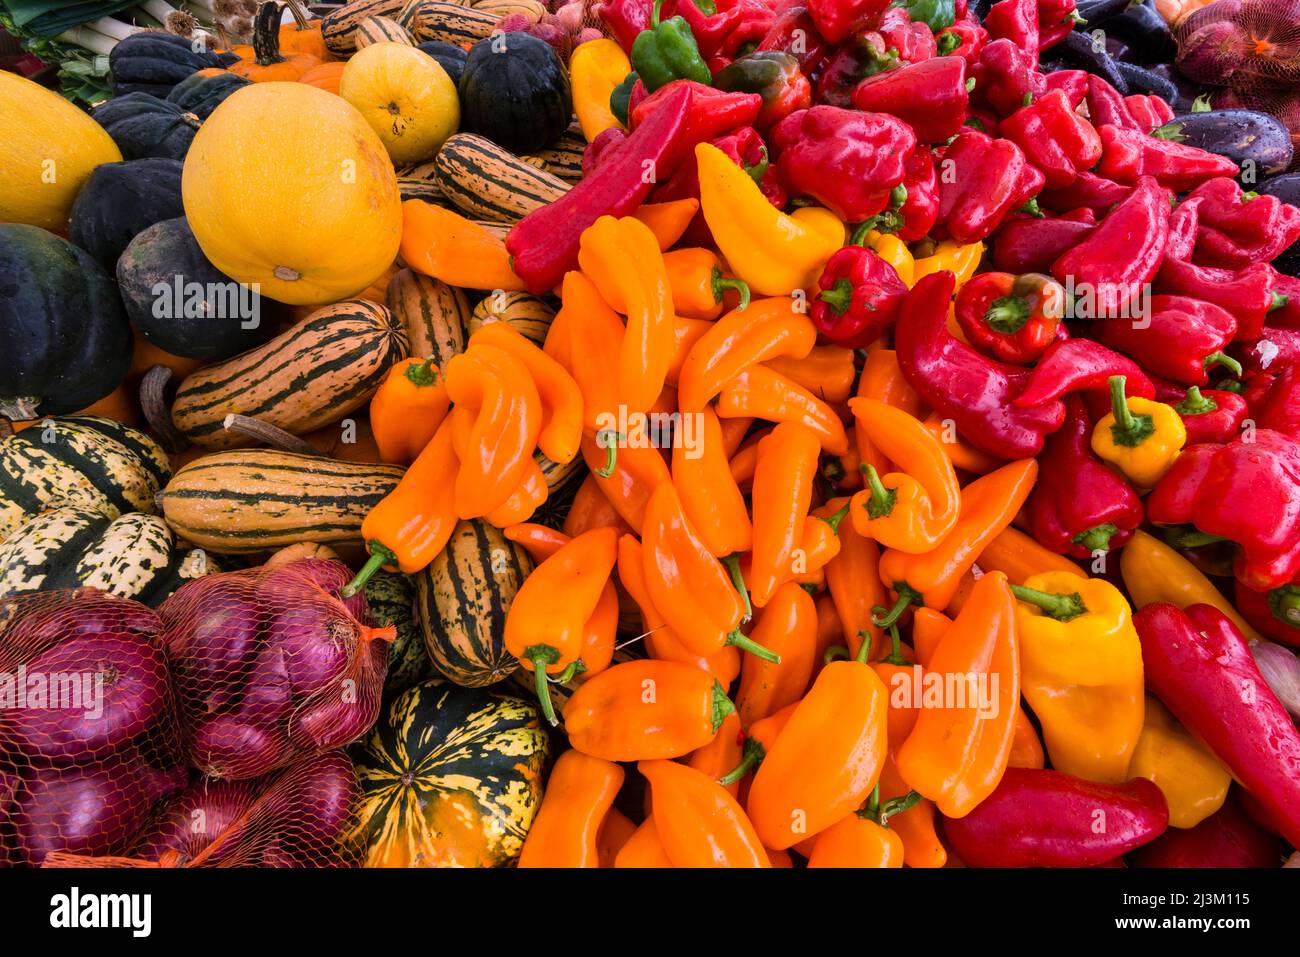 Fresh organic autumn vegetables on display for sale at a street market - pumpkins, red, orange and purple peppers, onions, eggplant Stock Photo